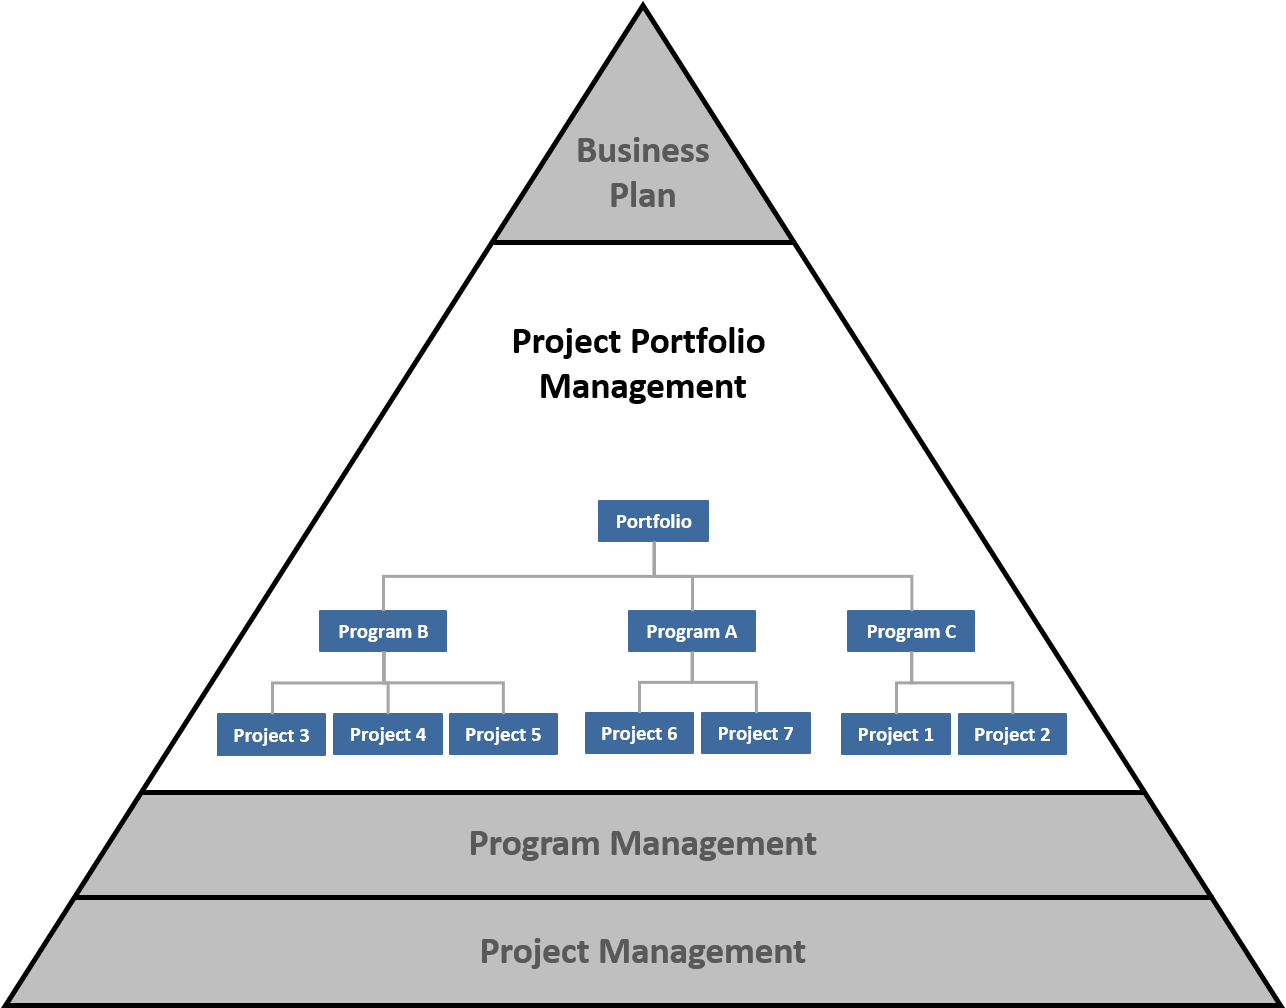 Organizational Project Management Framework triangle with 'Portfolio Management' section highlighted.